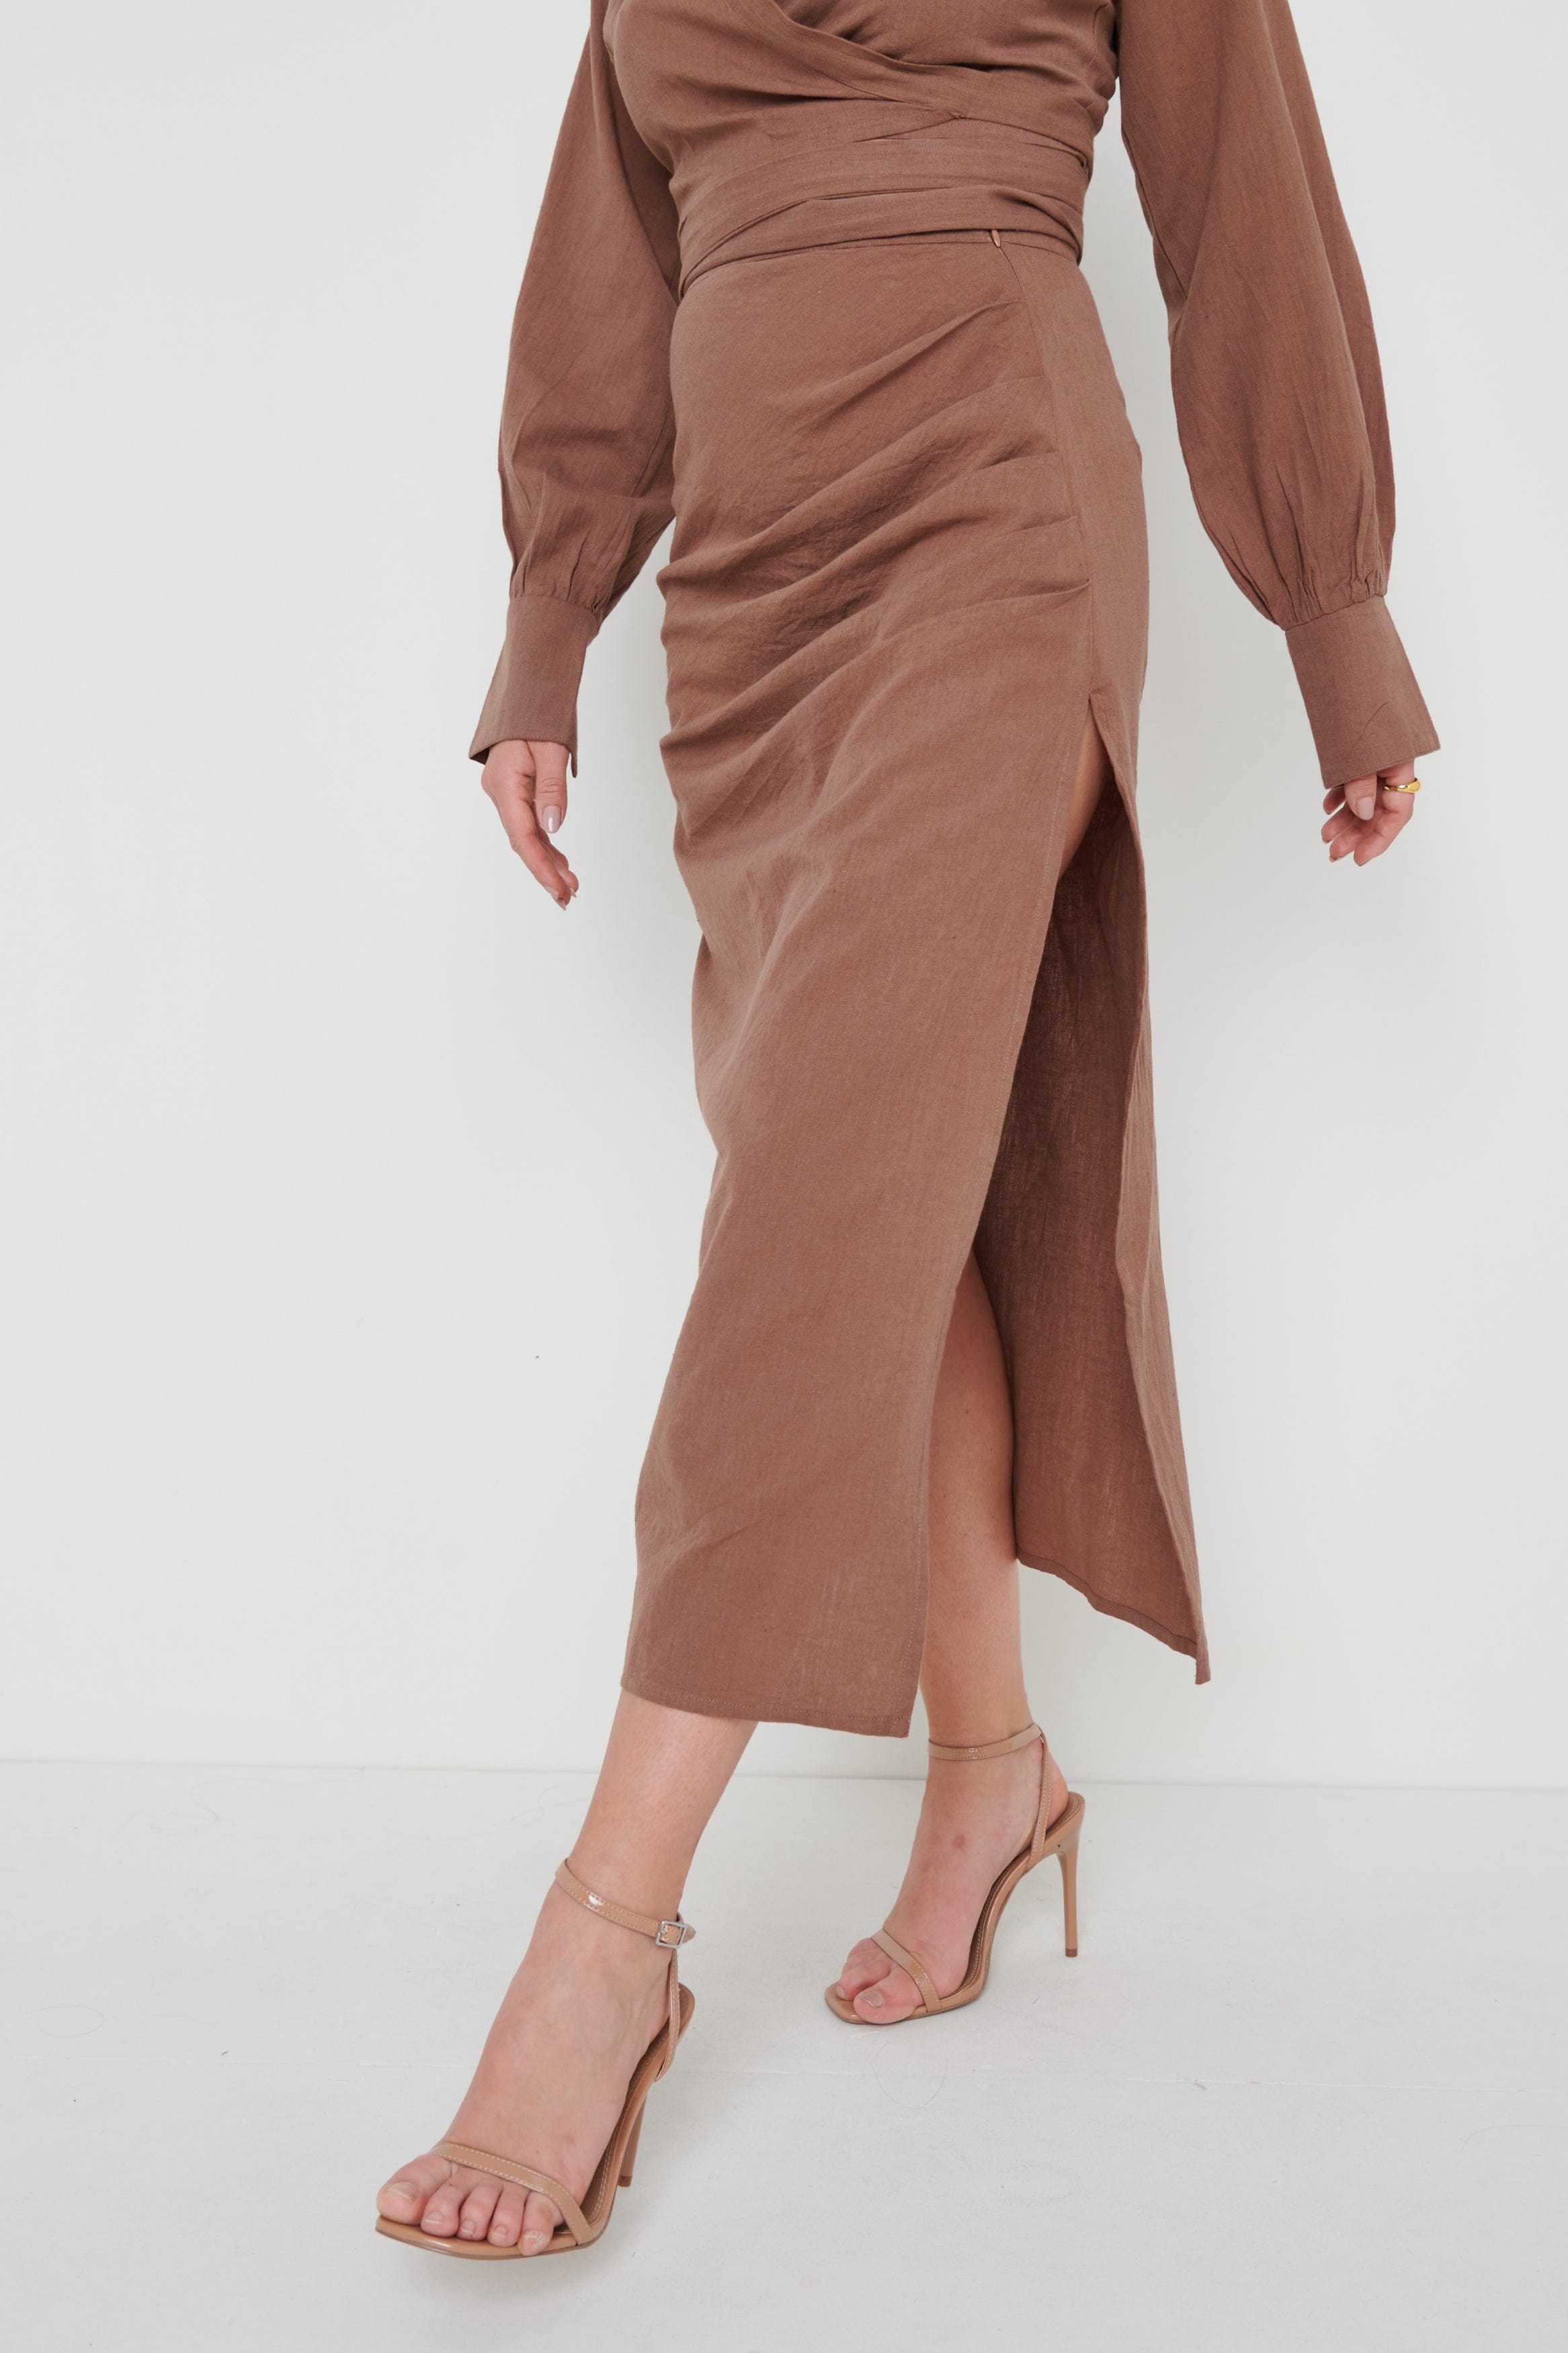 Harrie Ruched Skirt - Brown